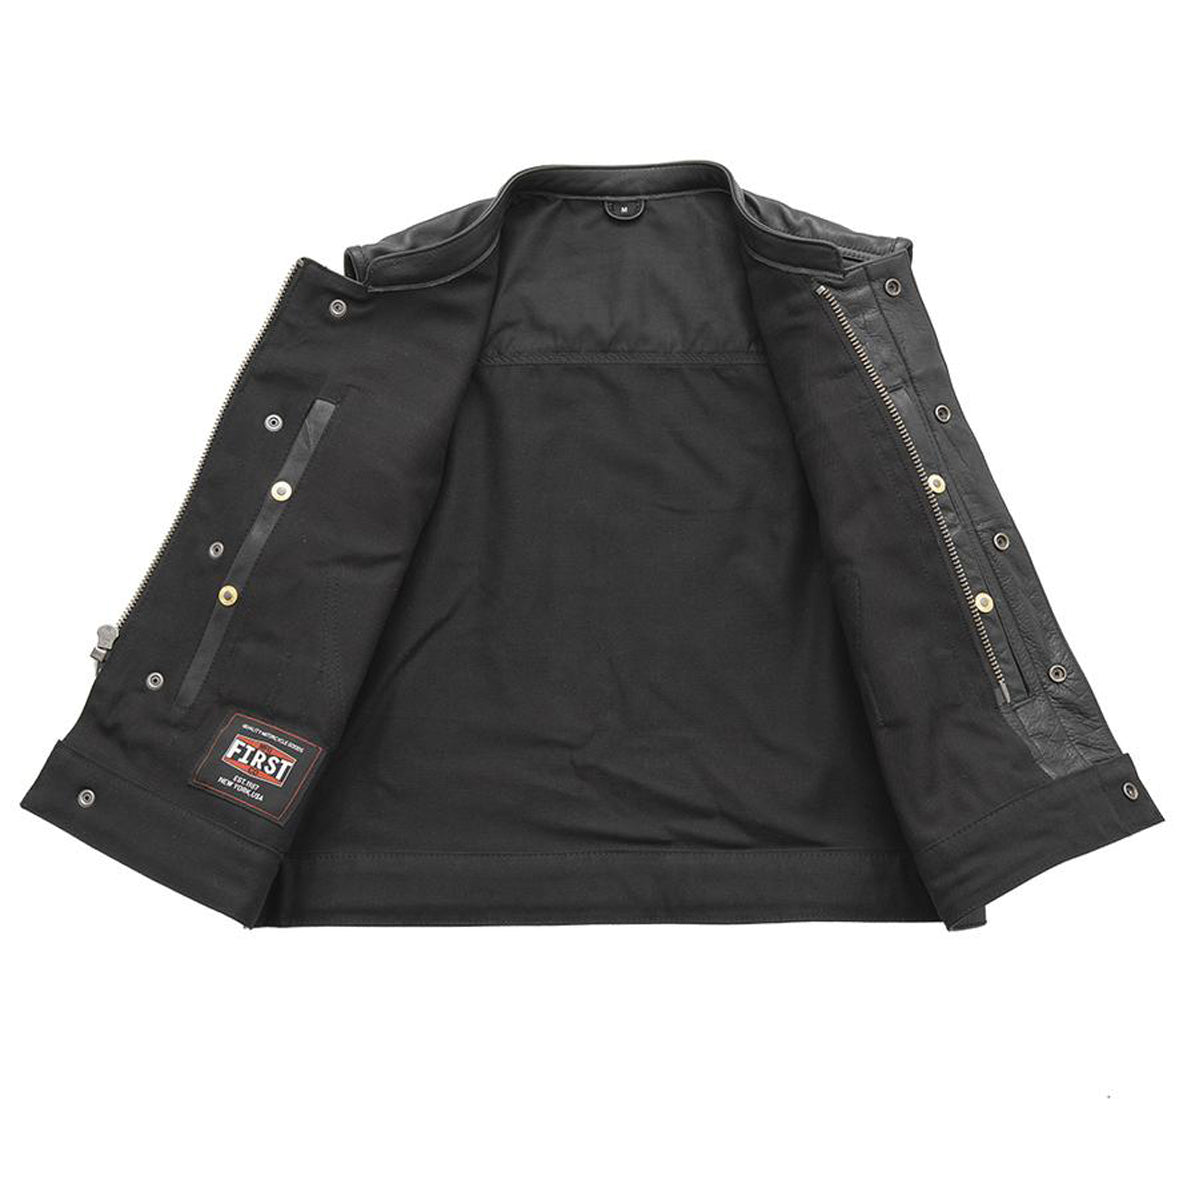 Lowrider - Men's Motorcycle Leather/Twill Vest